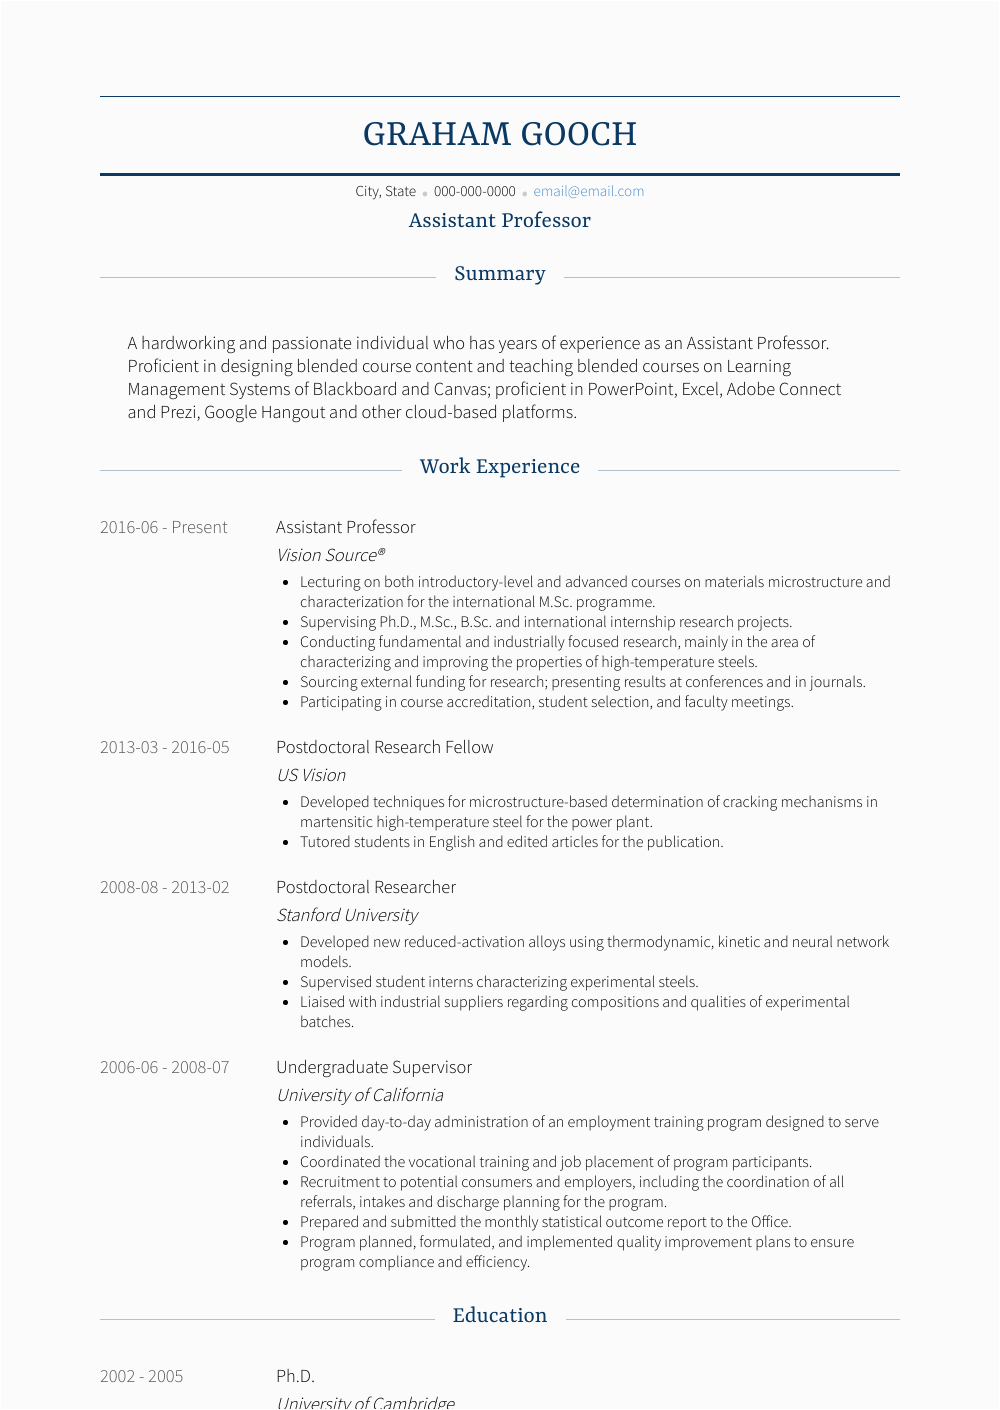 Resume Template for assistant Professor In Engineering College assistant Professor Resume Samples and Templates